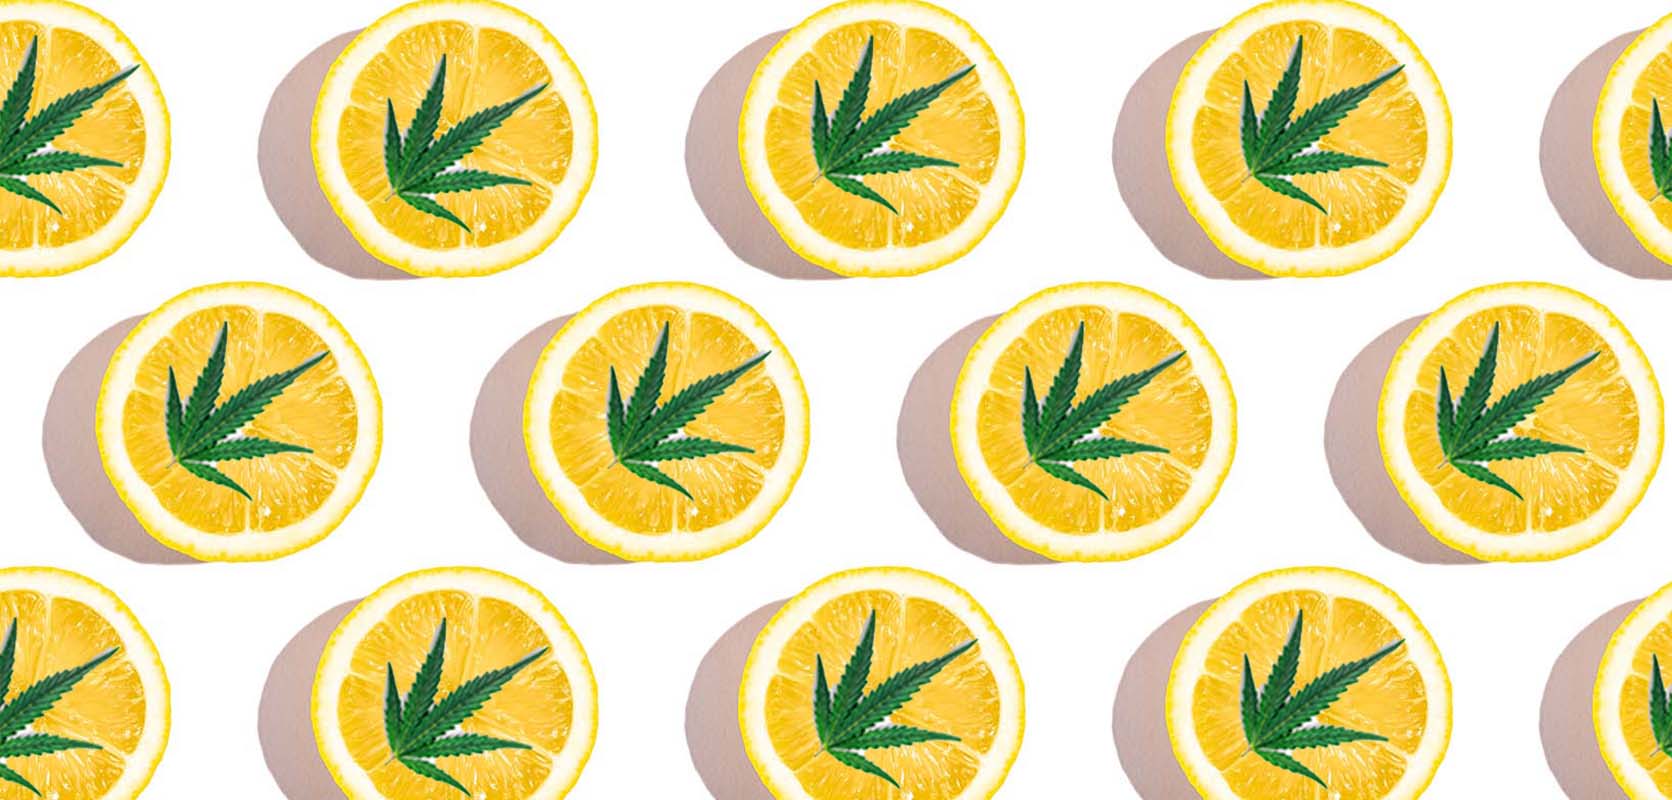 Lemon slices with cannabis leaf. buy weed online canada. weed stores. budget buds. weed dispensary. cannabis canada. weeds online. 